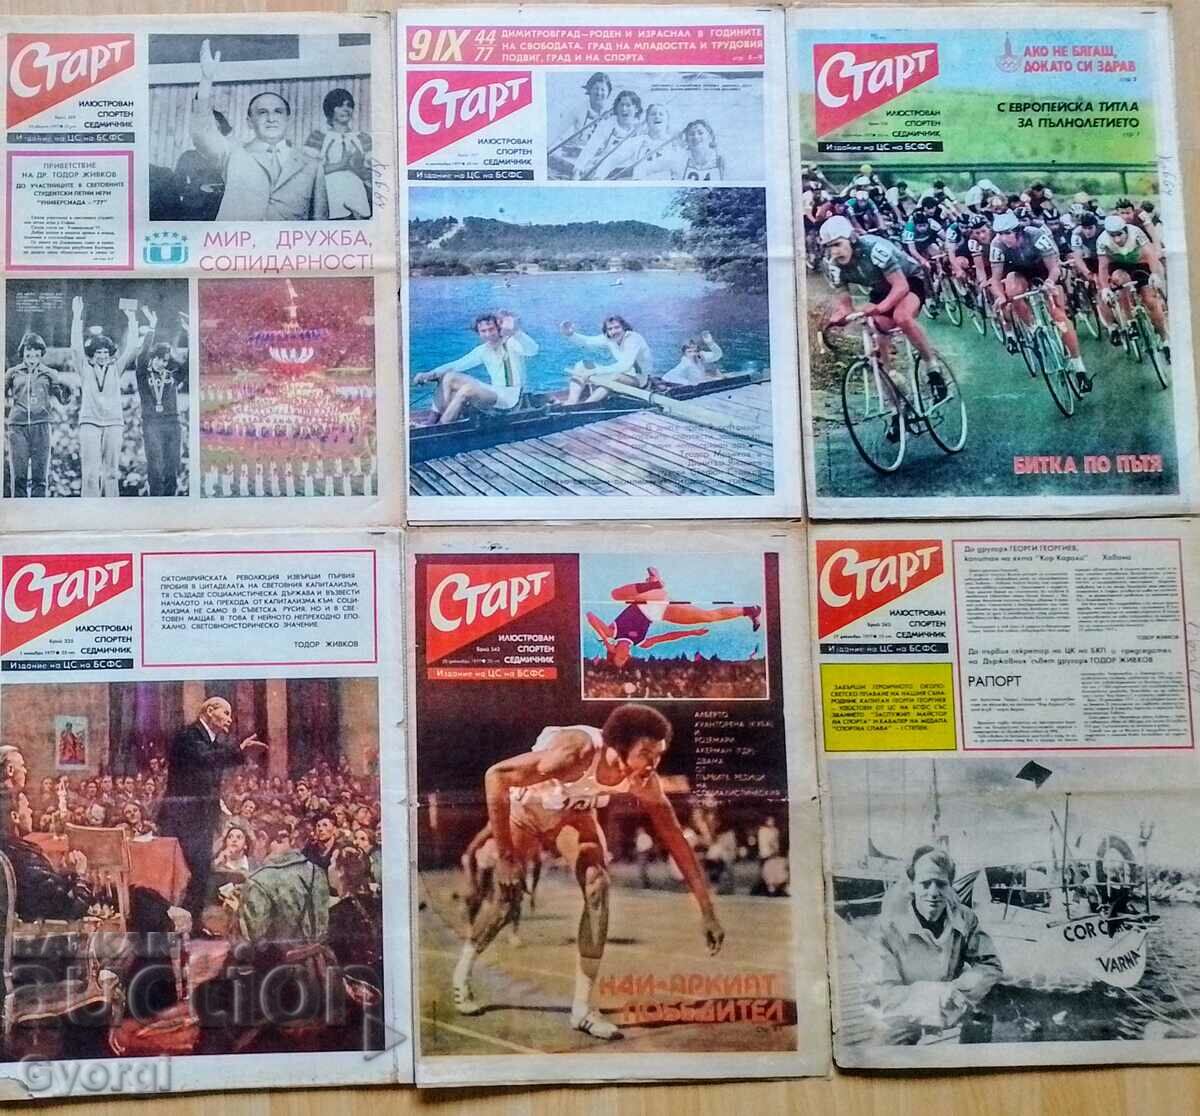 6 issues of START newspaper from 1977